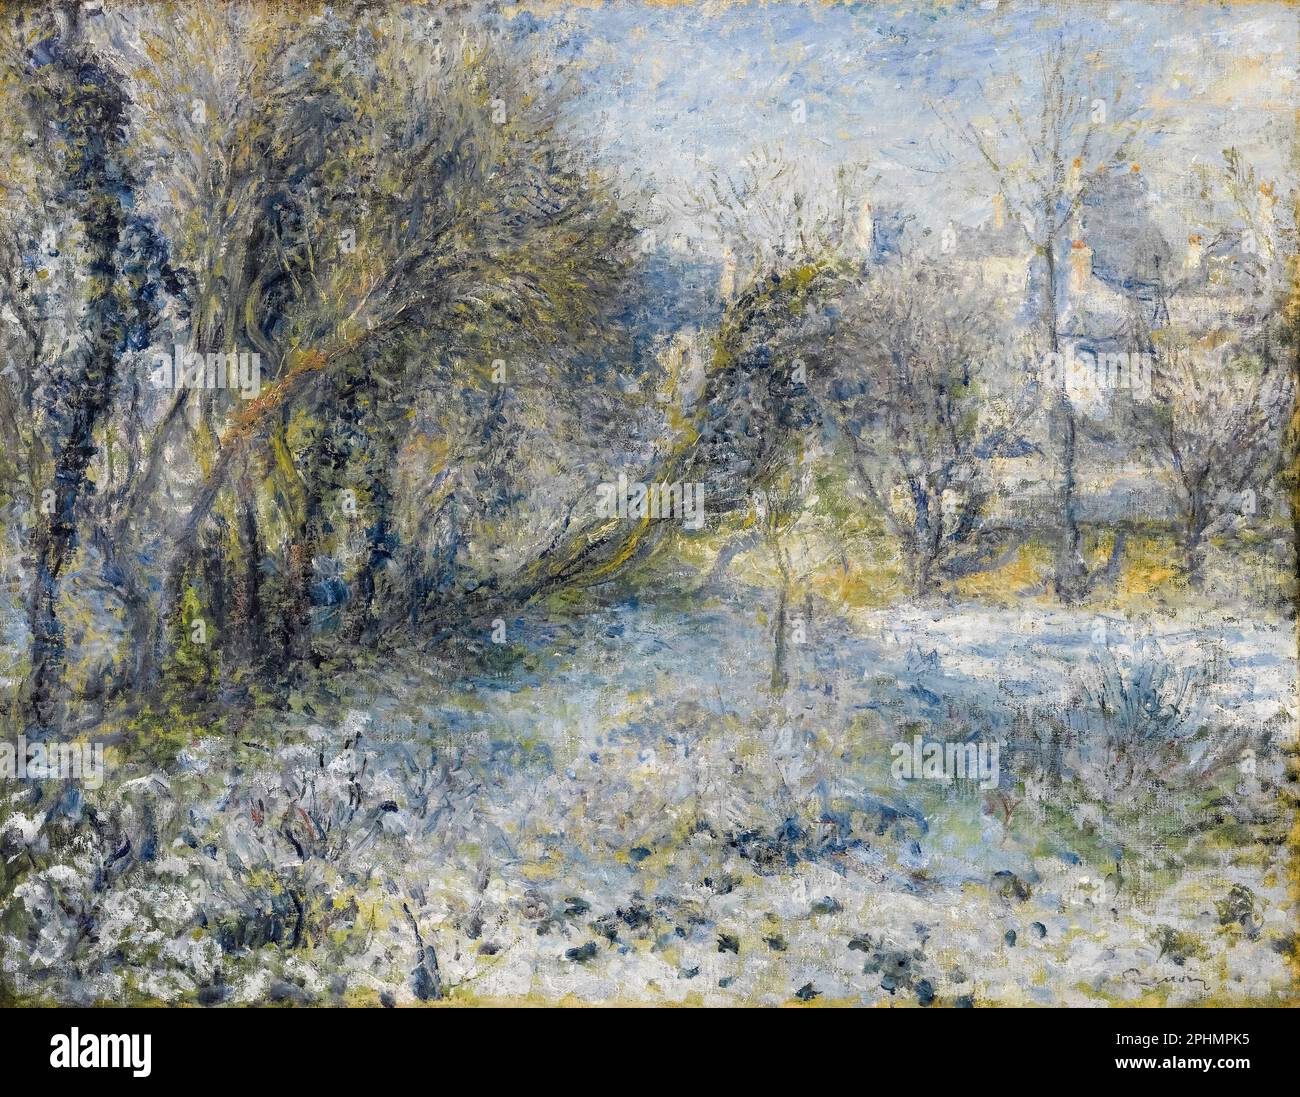 Pierre Auguste Renoir, Snow-covered Landscape, painting in oil on canvas, 1870-1875 Stock Photo